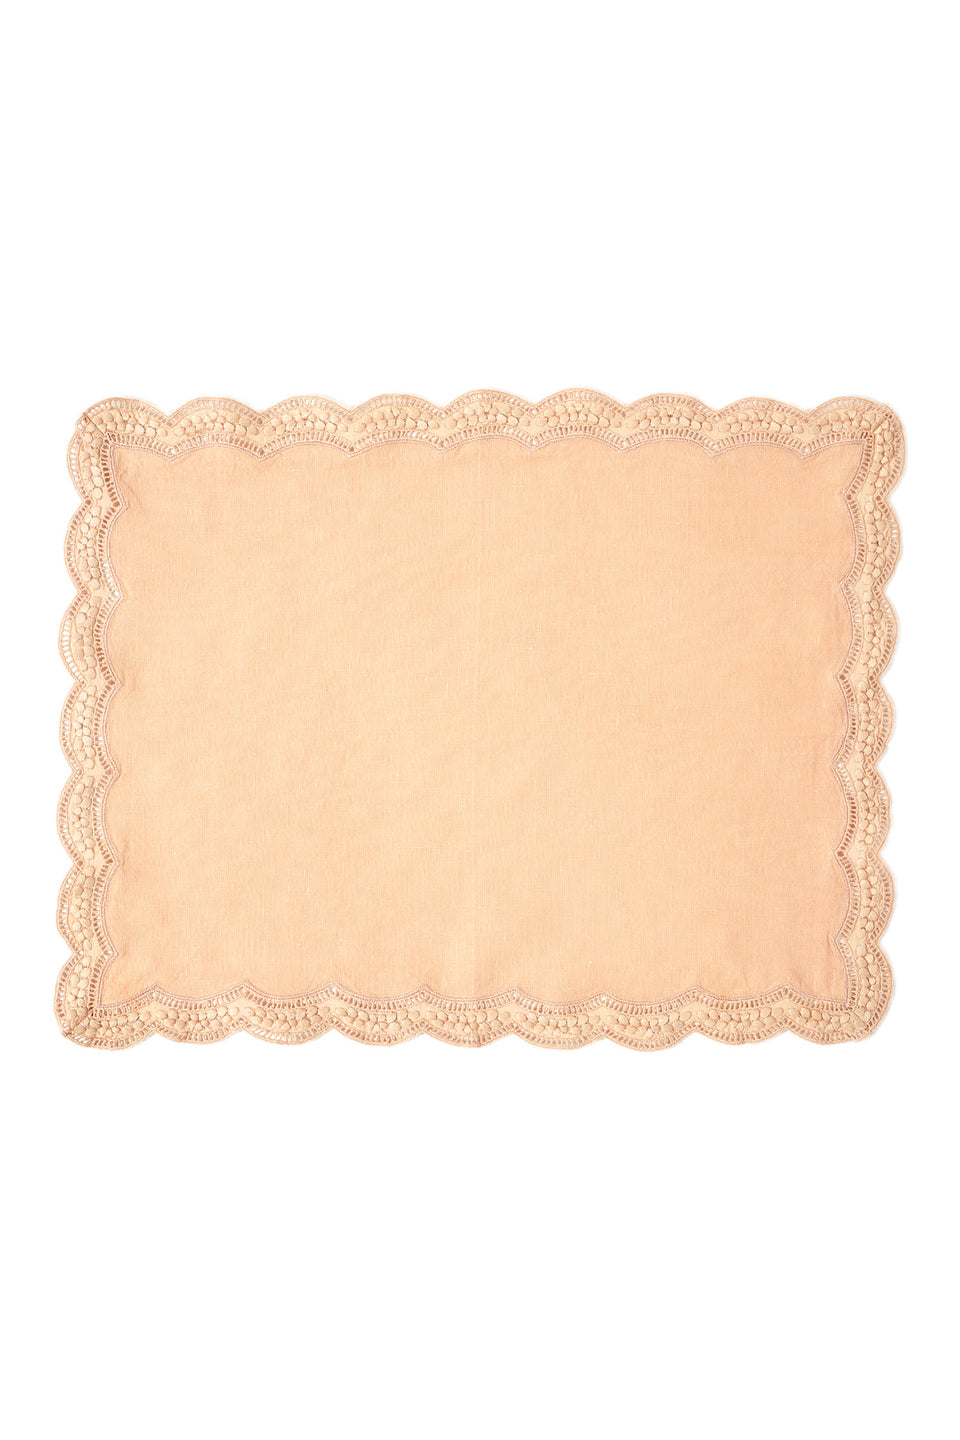 Scallop Embroidered Placemat - Blush